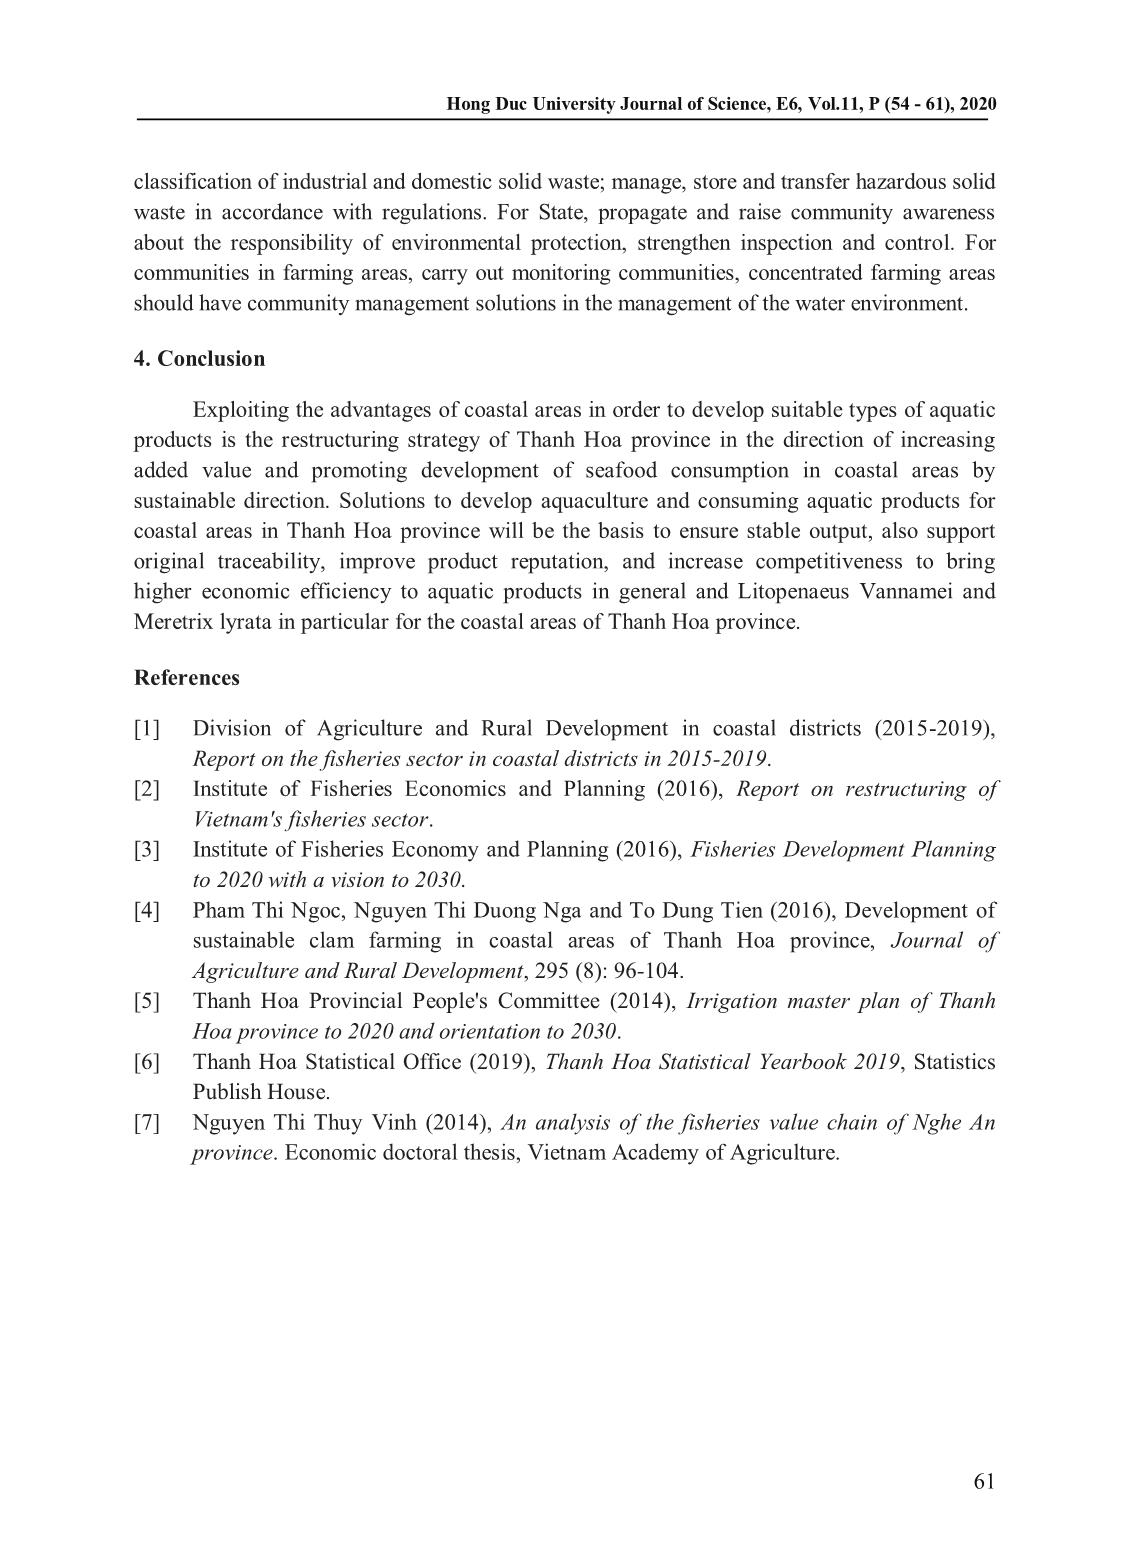 Solutions for developing aquaculture and aquatic products consumption in coastal areas of Thanh hoa province trang 9